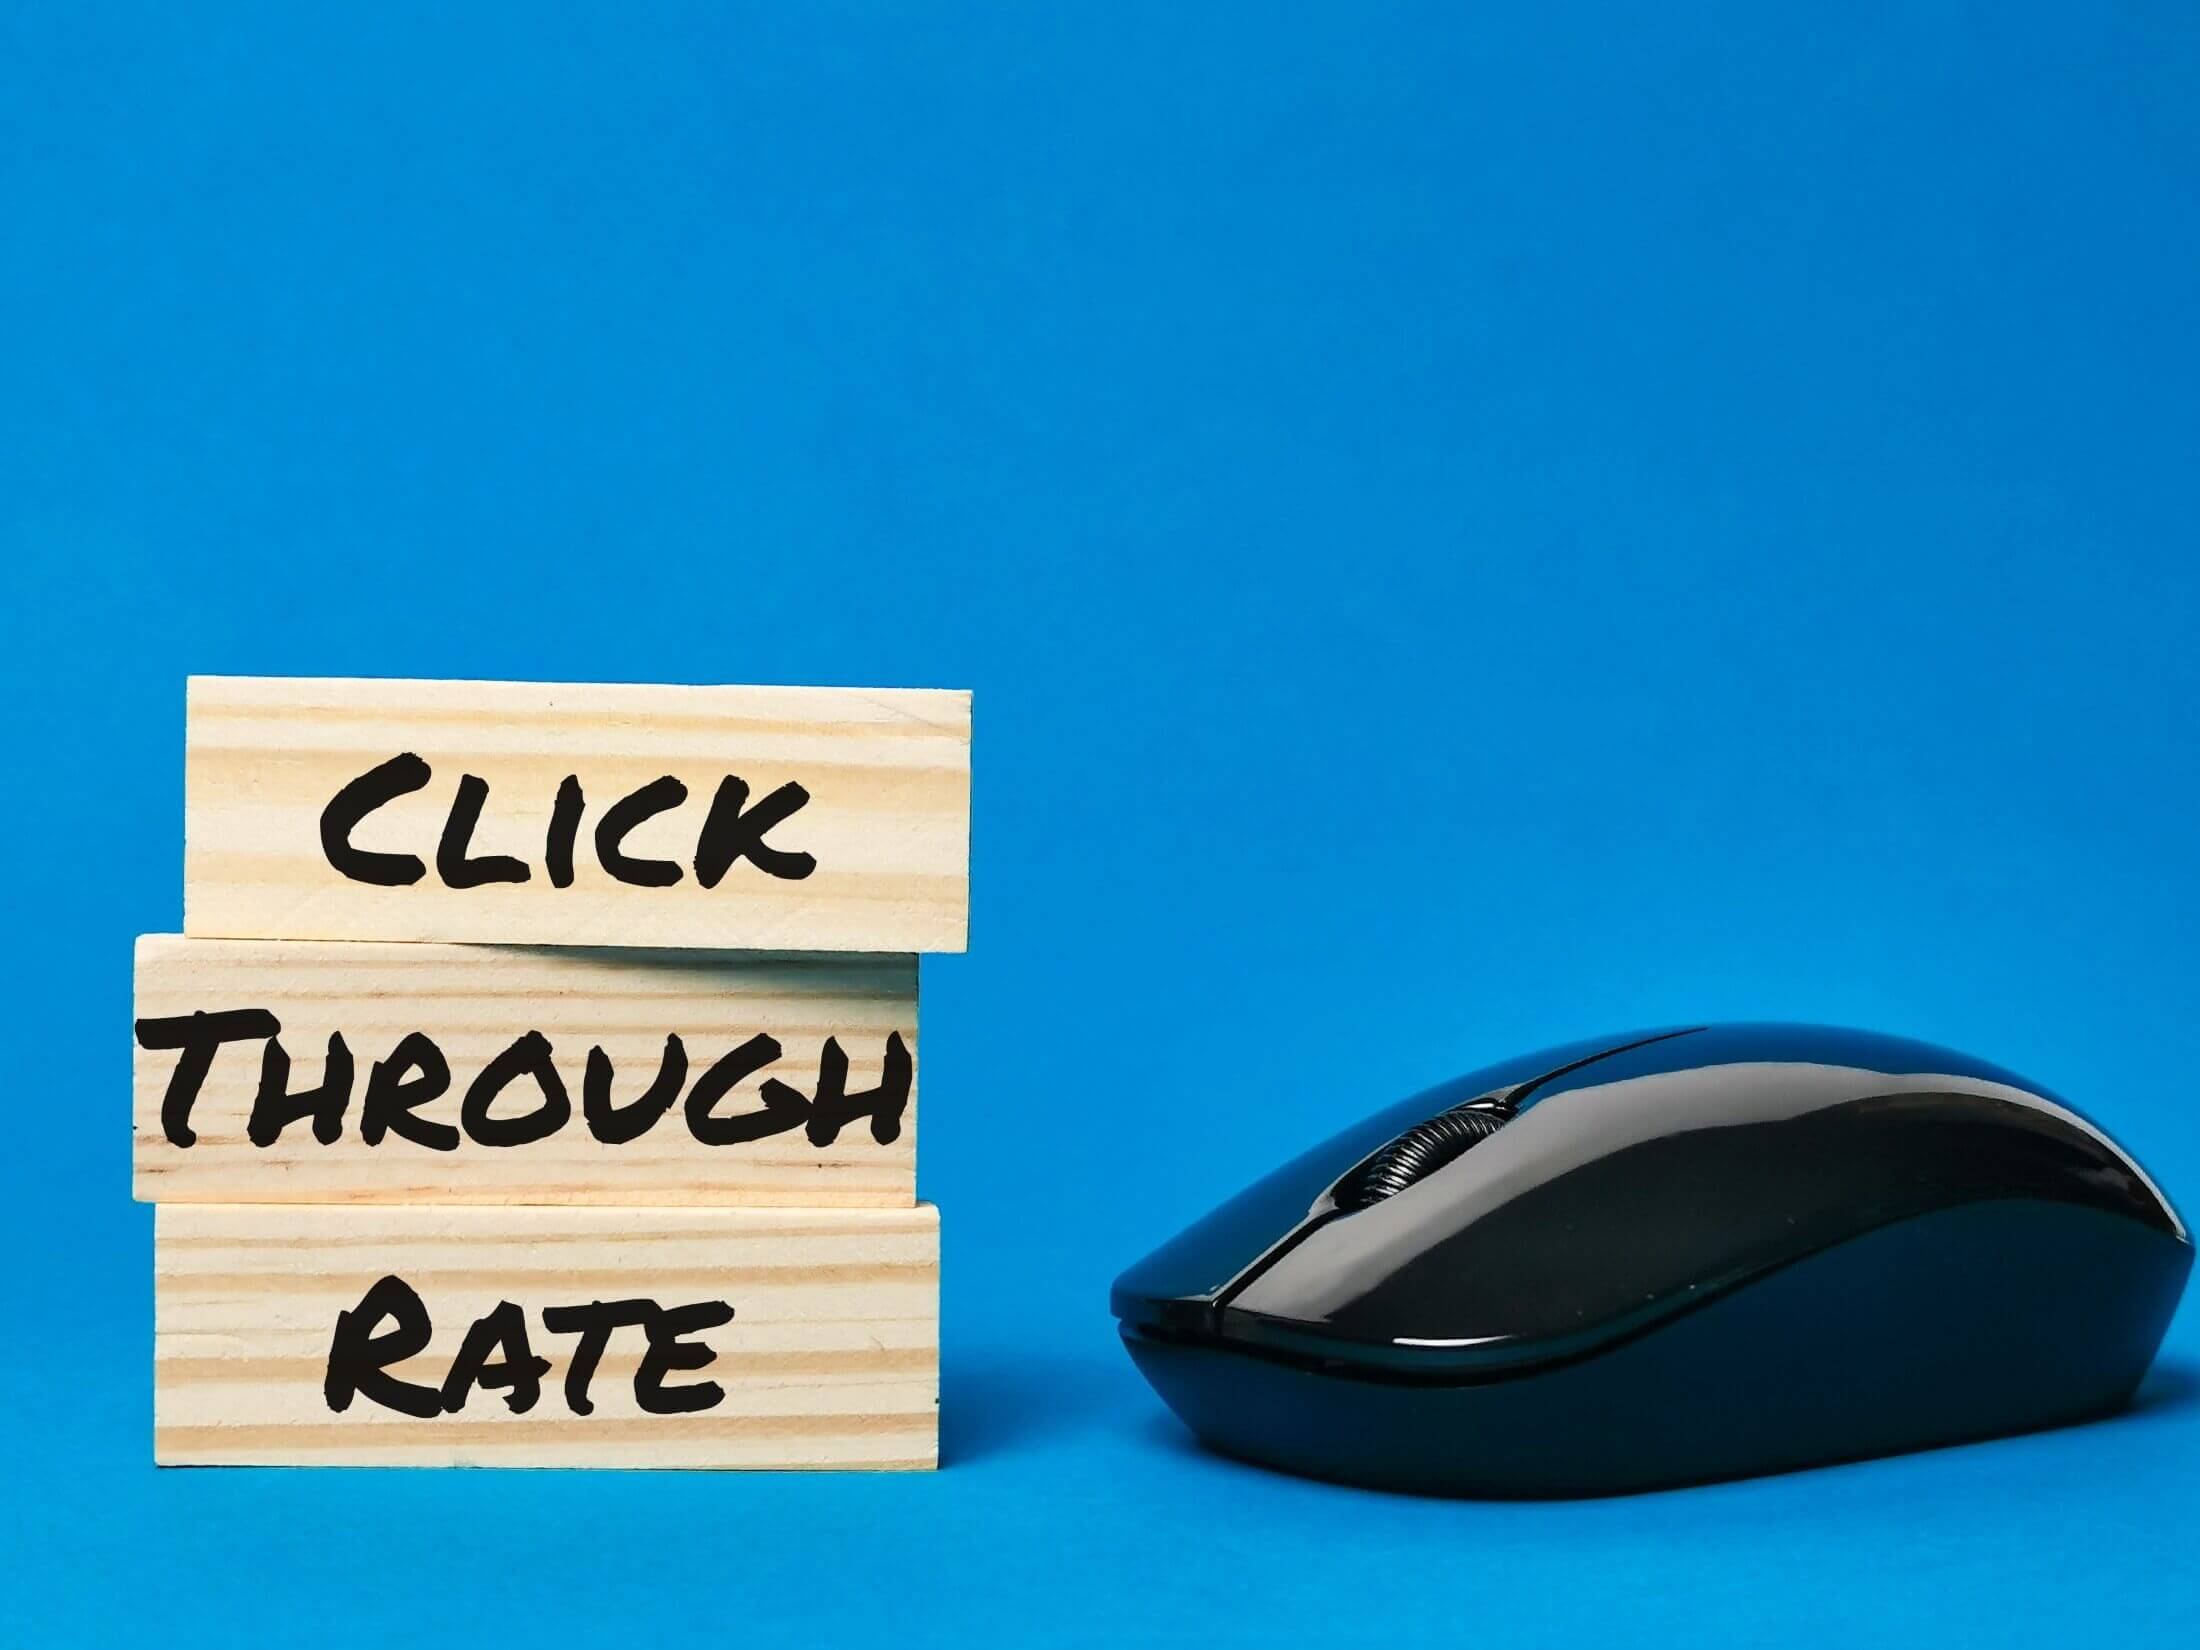 Three wooden blocks with letters spelling out 'CTR' for 'Click Through Rate', next to a computer mouse, representing the concept of digital marketing metrics.